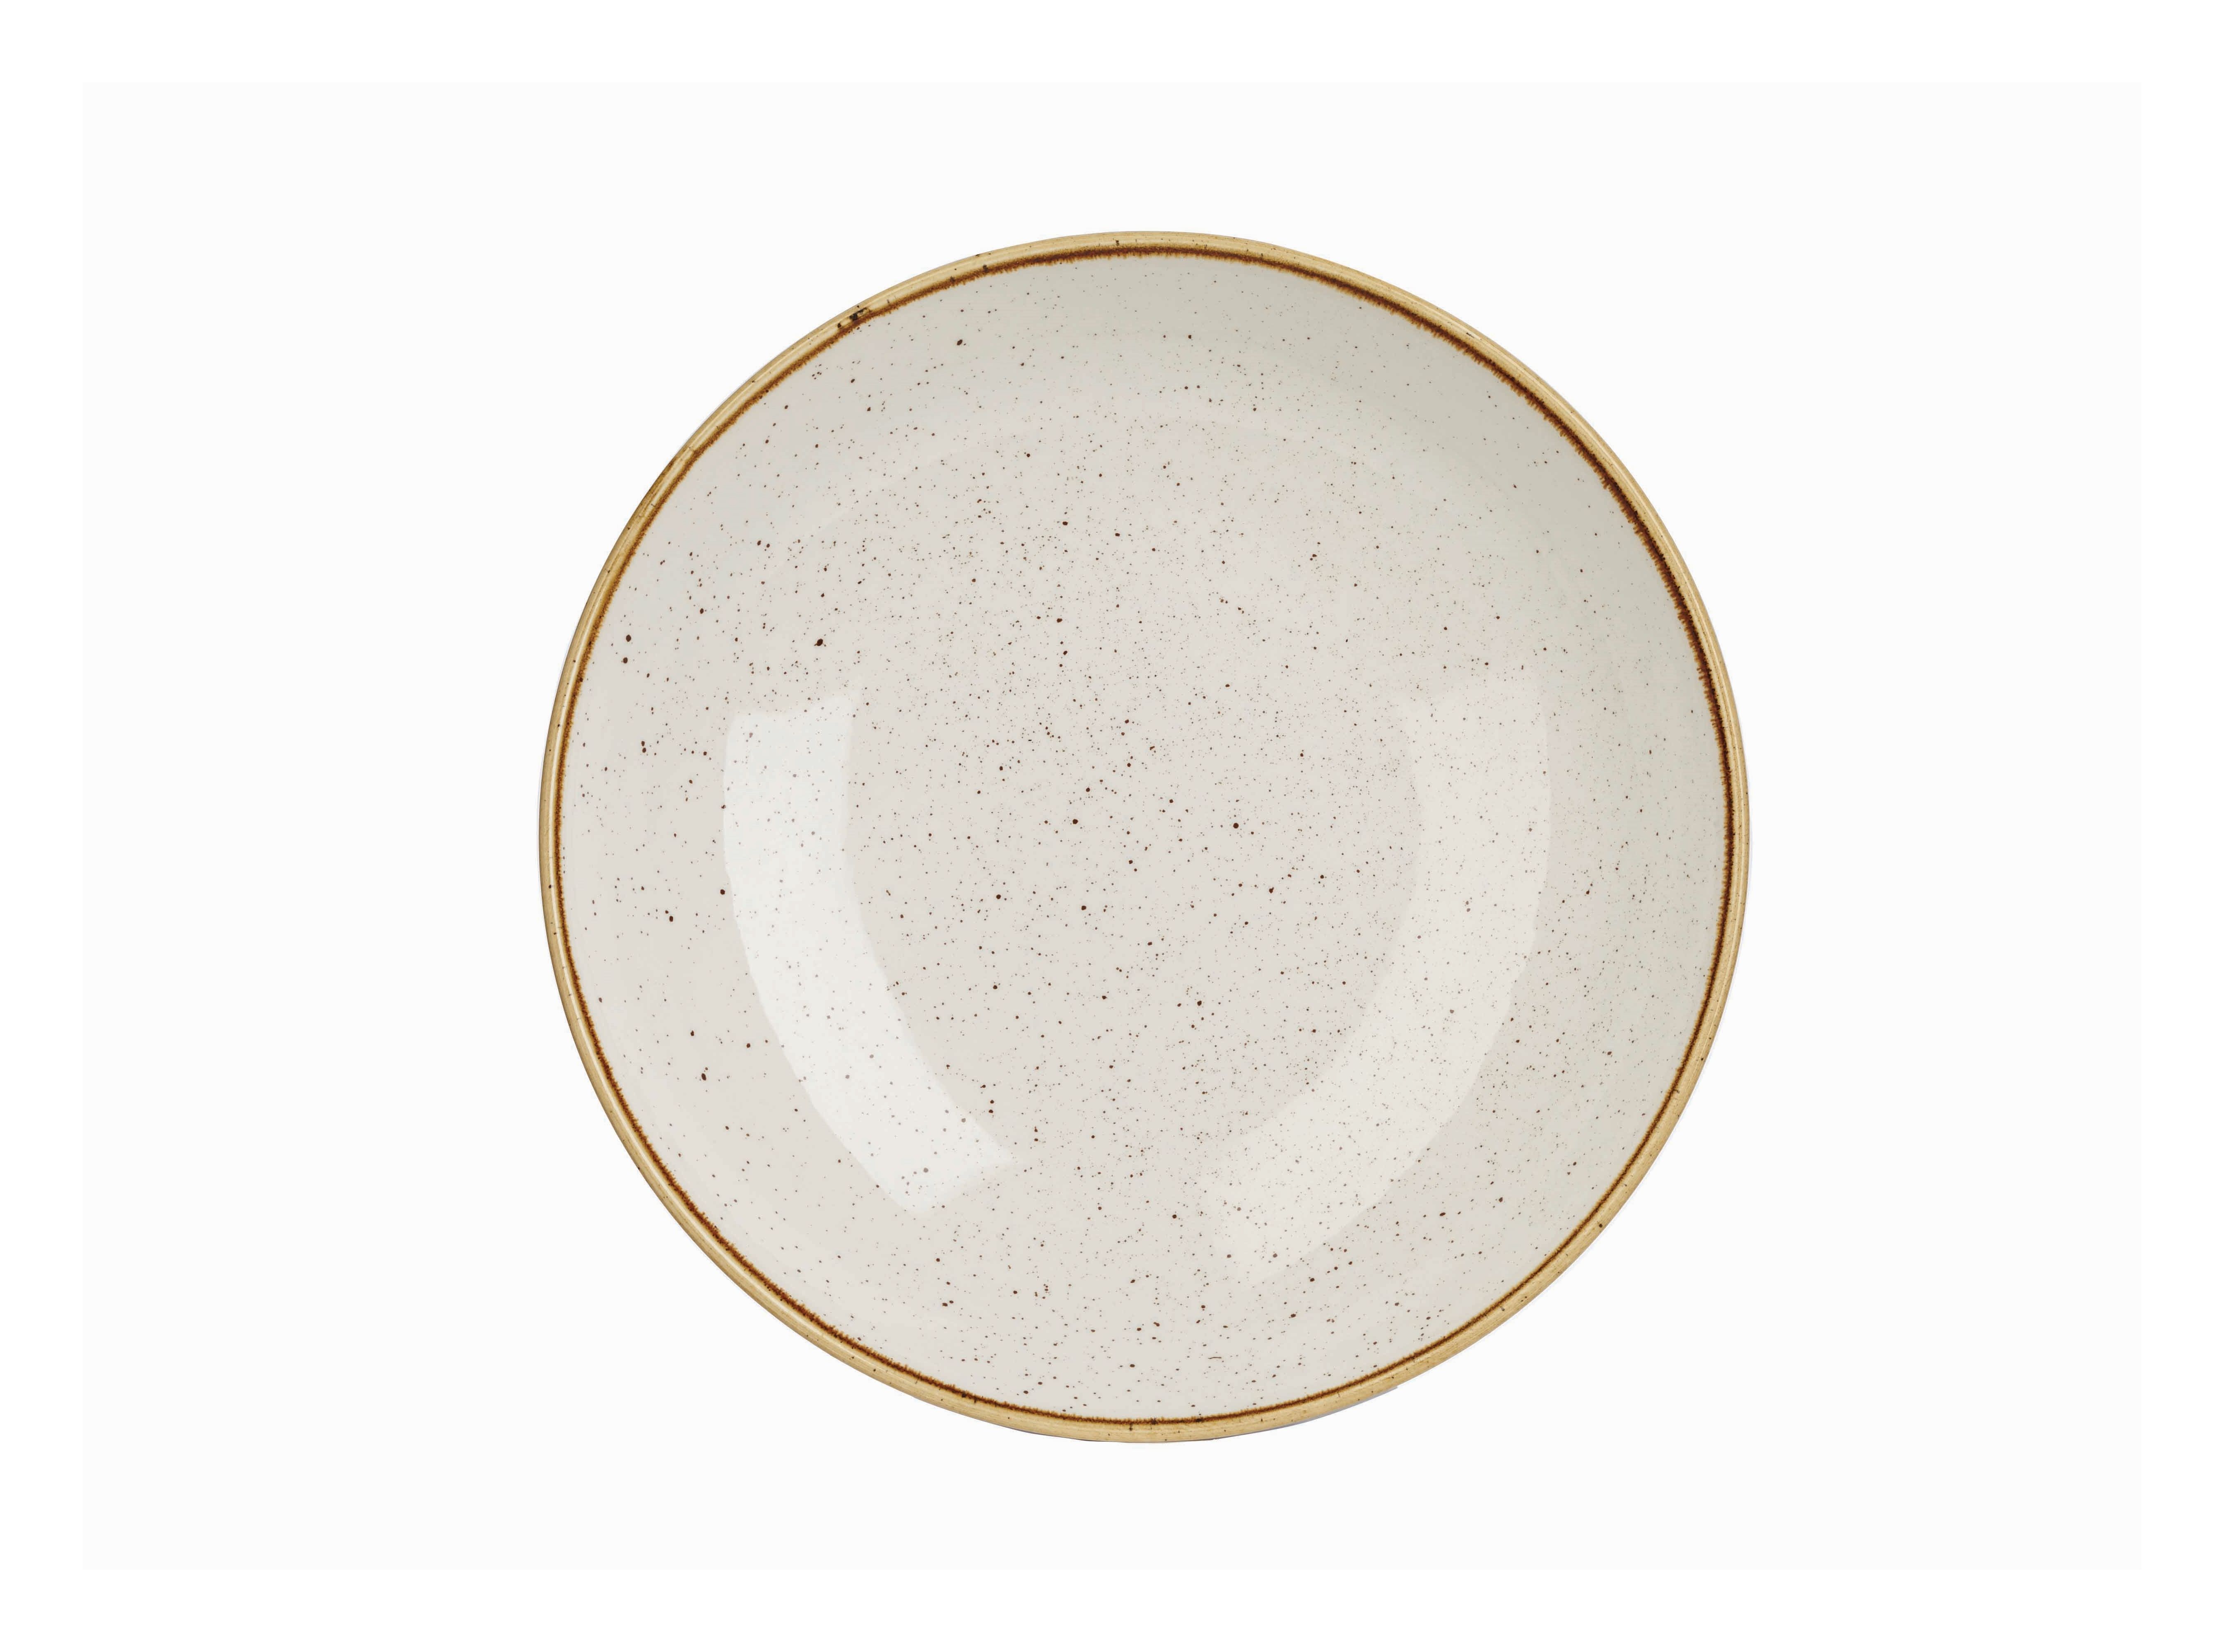 Teller tief coup 31cm STONECAST barley white